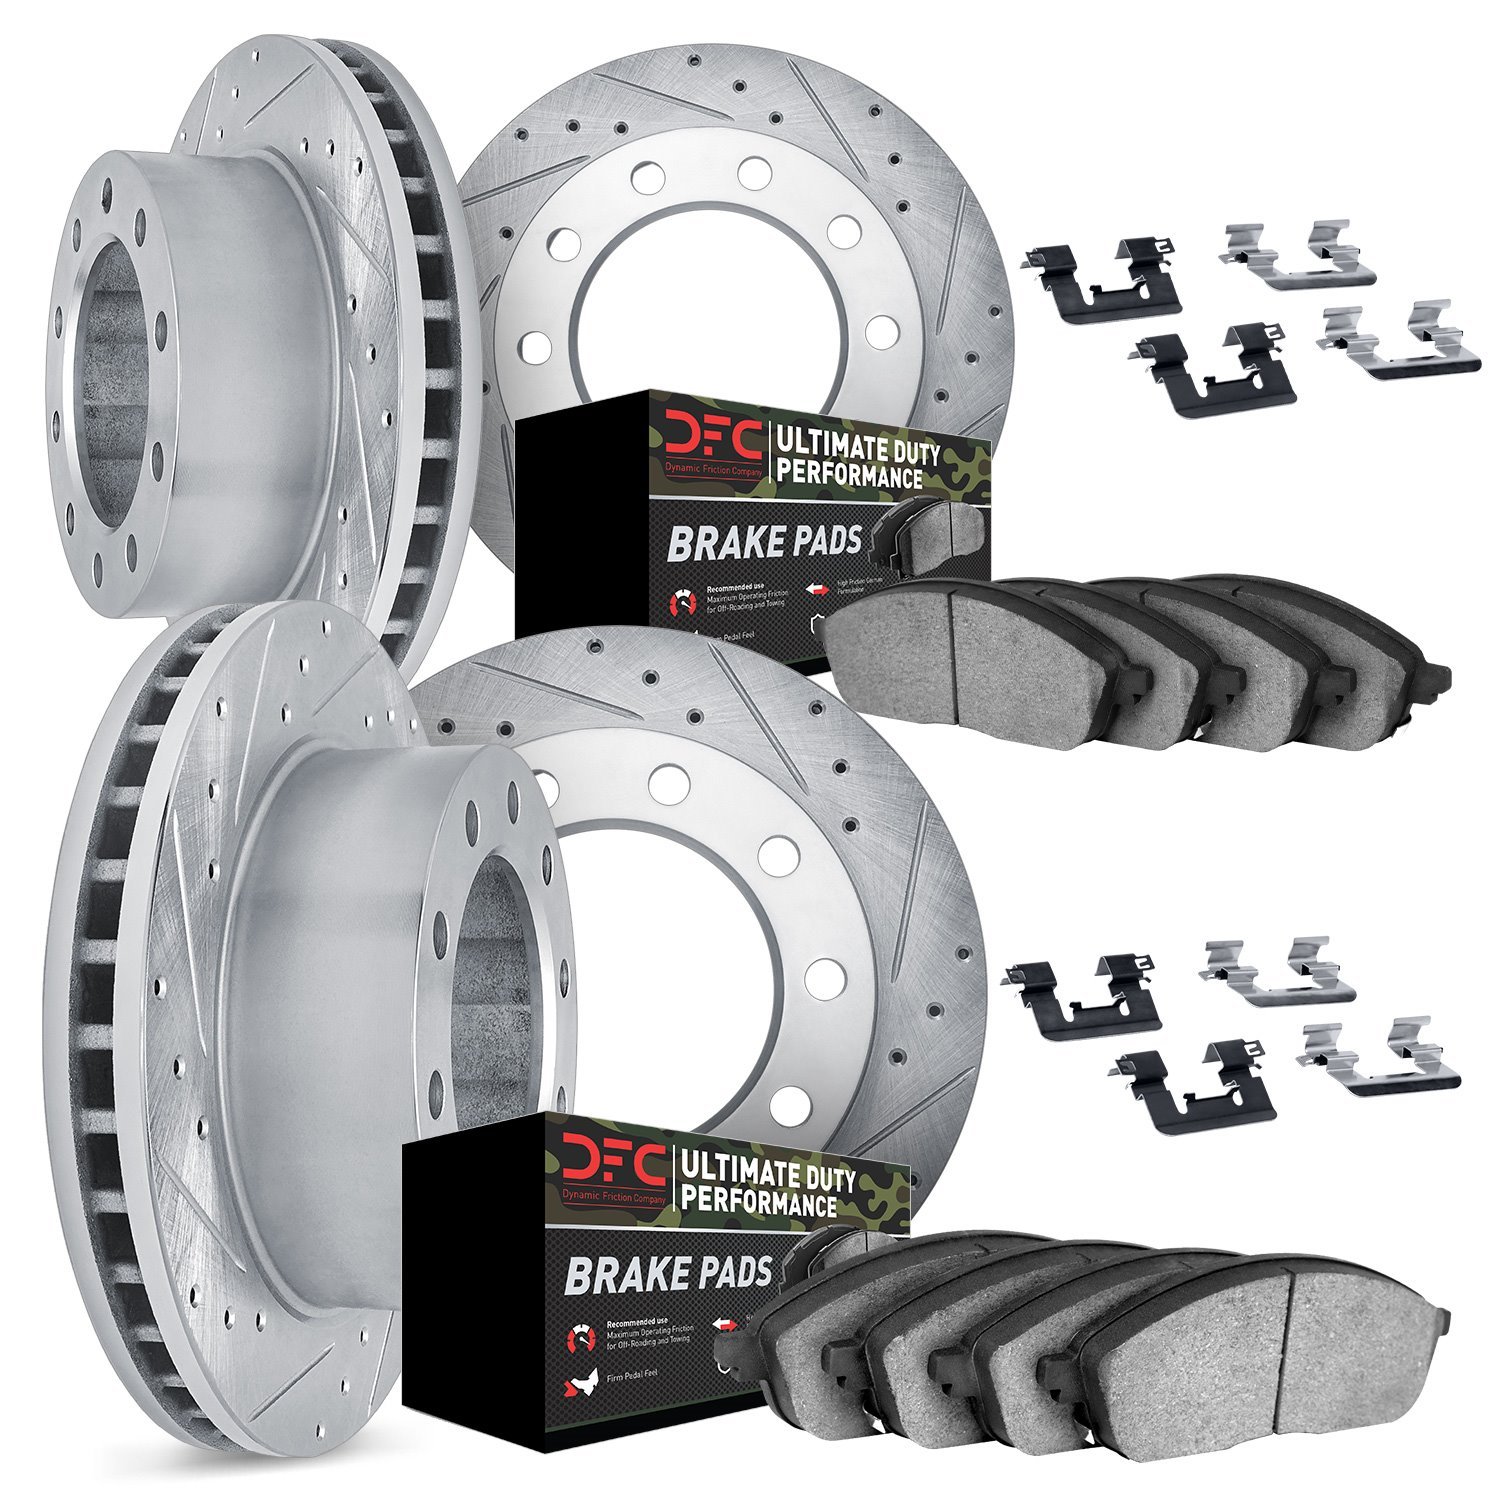 7414-54055 Drilled/Slotted Brake Rotors with Ultimate-Duty Brake Pads Kit & Hardware [Silver], Fits Select Ford/Lincoln/Mercury/